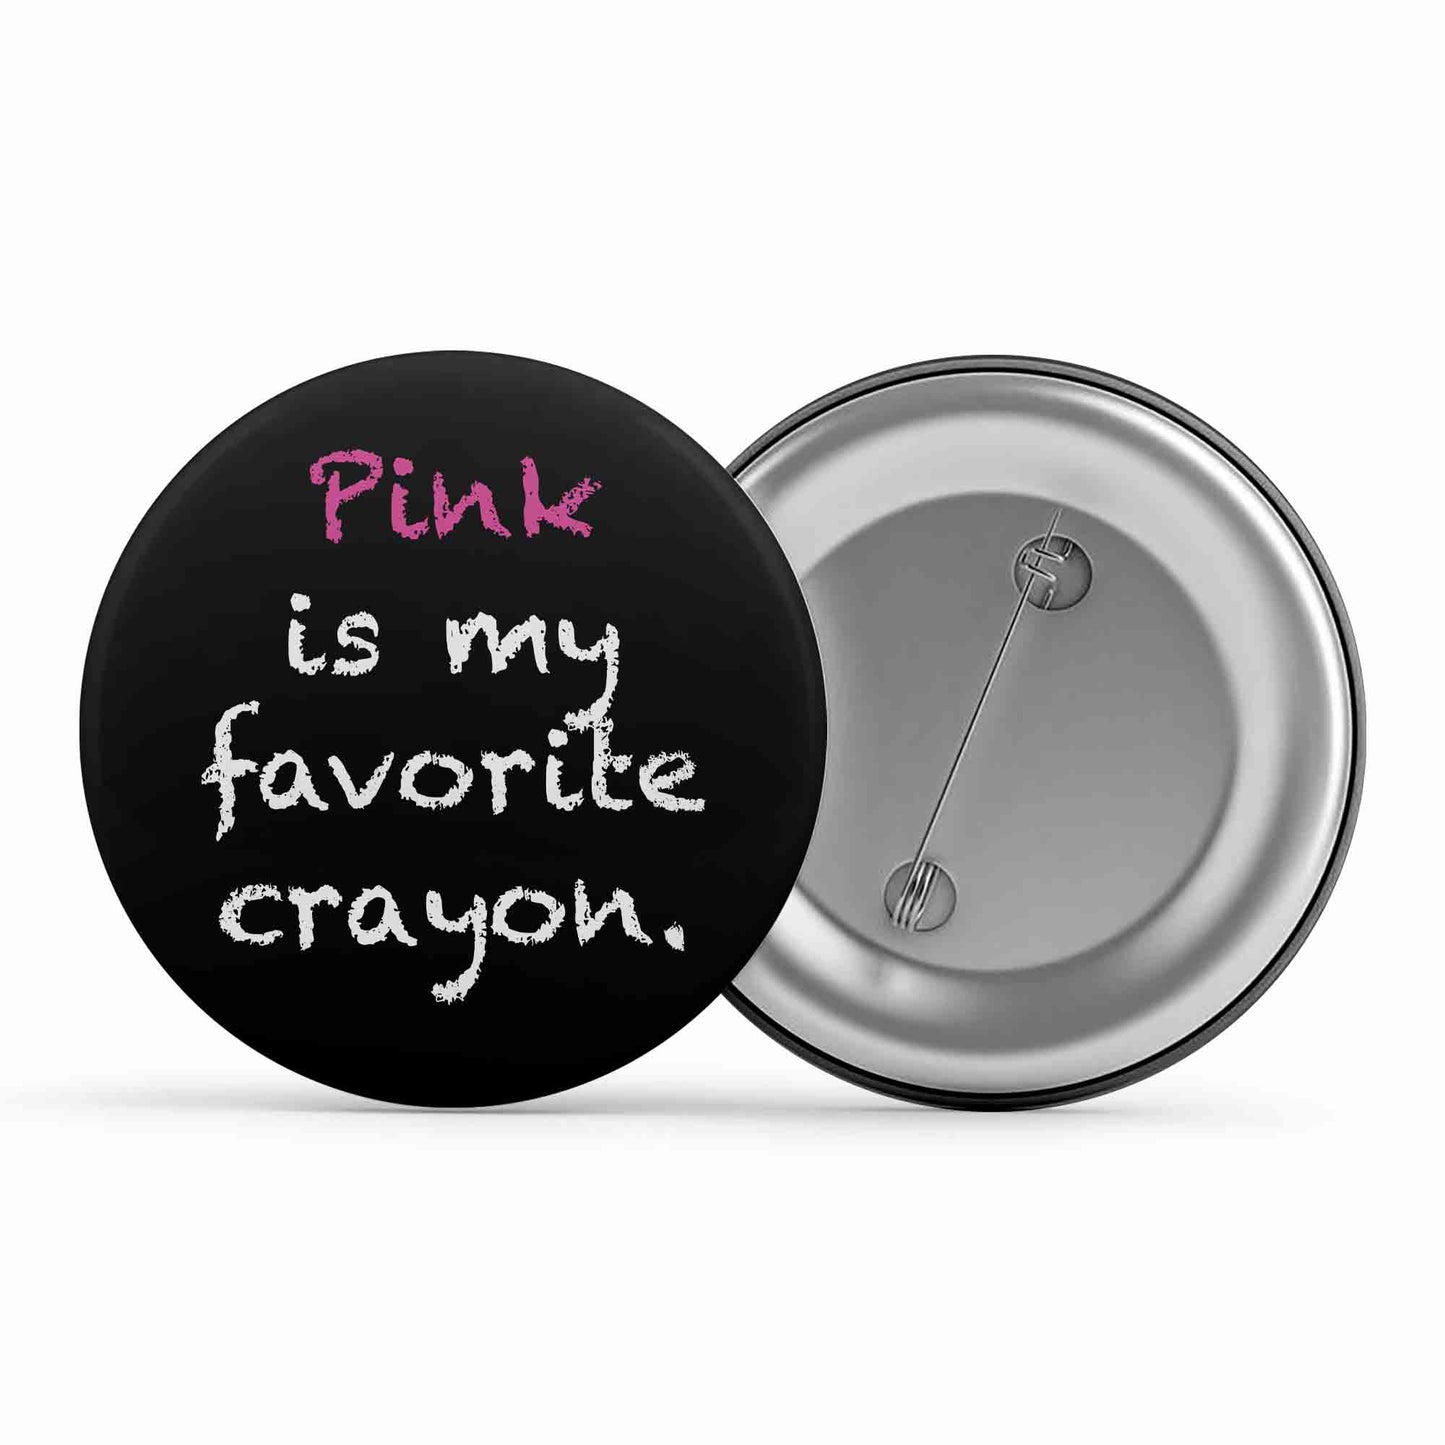 aerosmith pink is my favorite color badge pin button music band buy online india the banyan tee tbt men women girls boys unisex